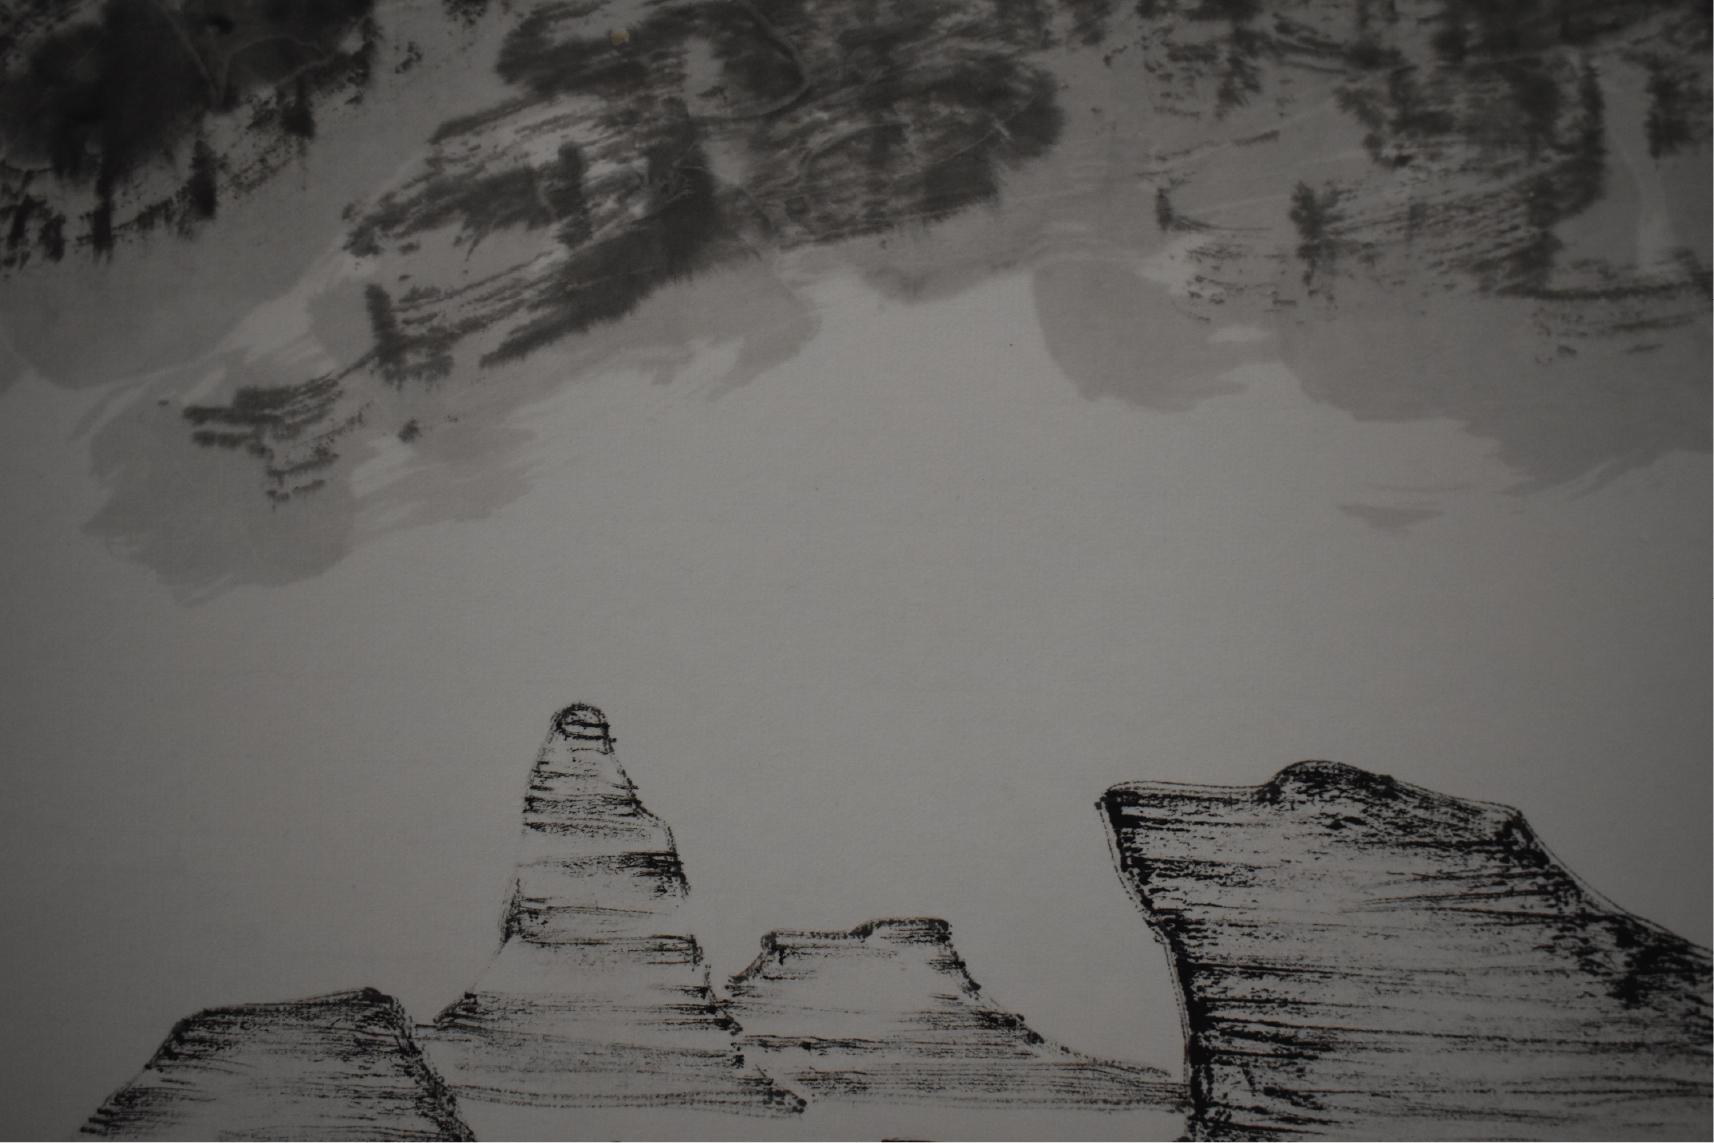 Surrealistic Landscape.Contemporary interpretation of Chinese Ink Painting - Gray Landscape Painting by Kium